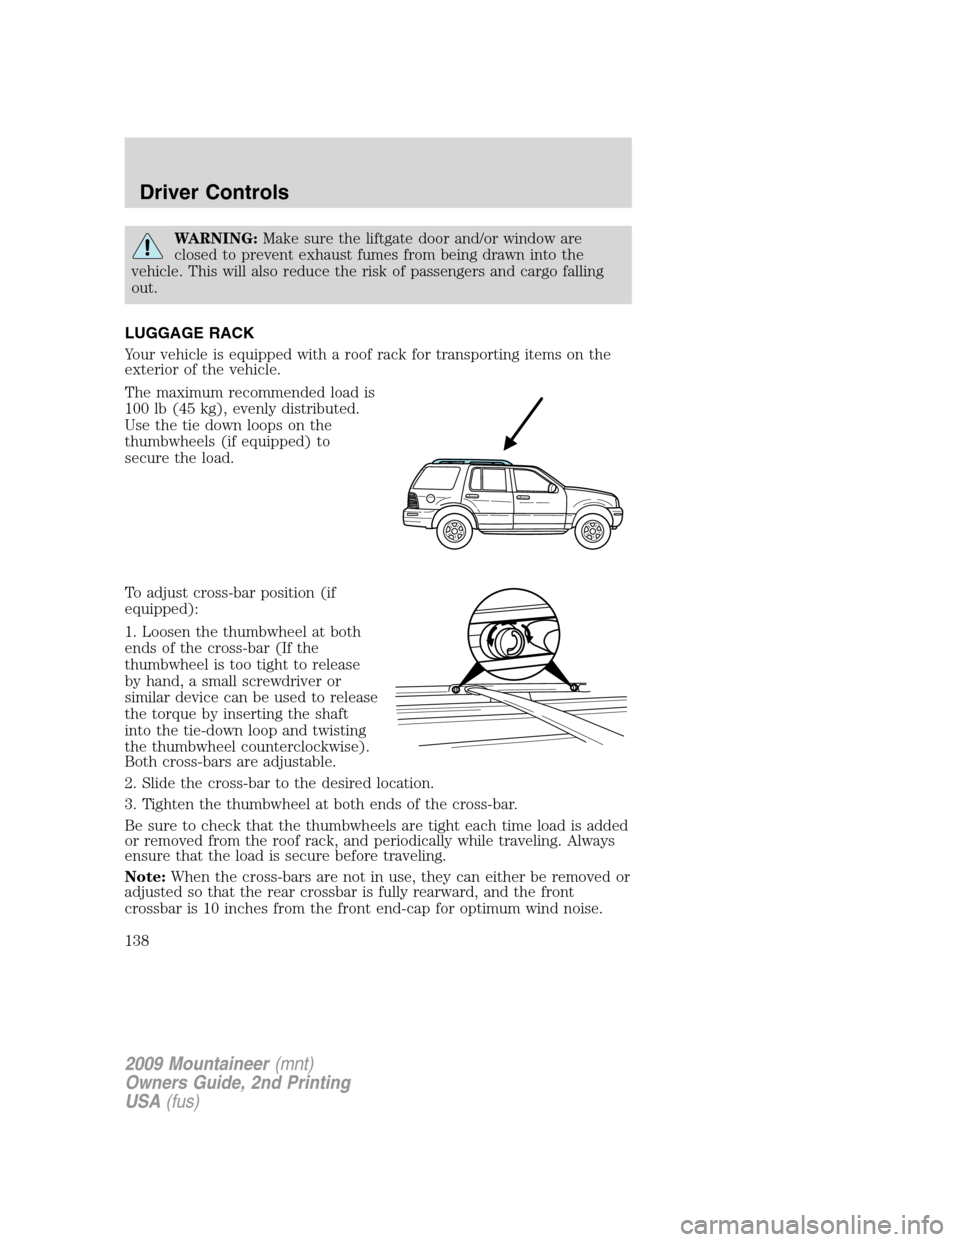 Mercury Mountaineer 2009  Owners Manuals WARNING:Make sure the liftgate door and/or window are
closed to prevent exhaust fumes from being drawn into the
vehicle. This will also reduce the risk of passengers and cargo falling
out.
LUGGAGE RAC